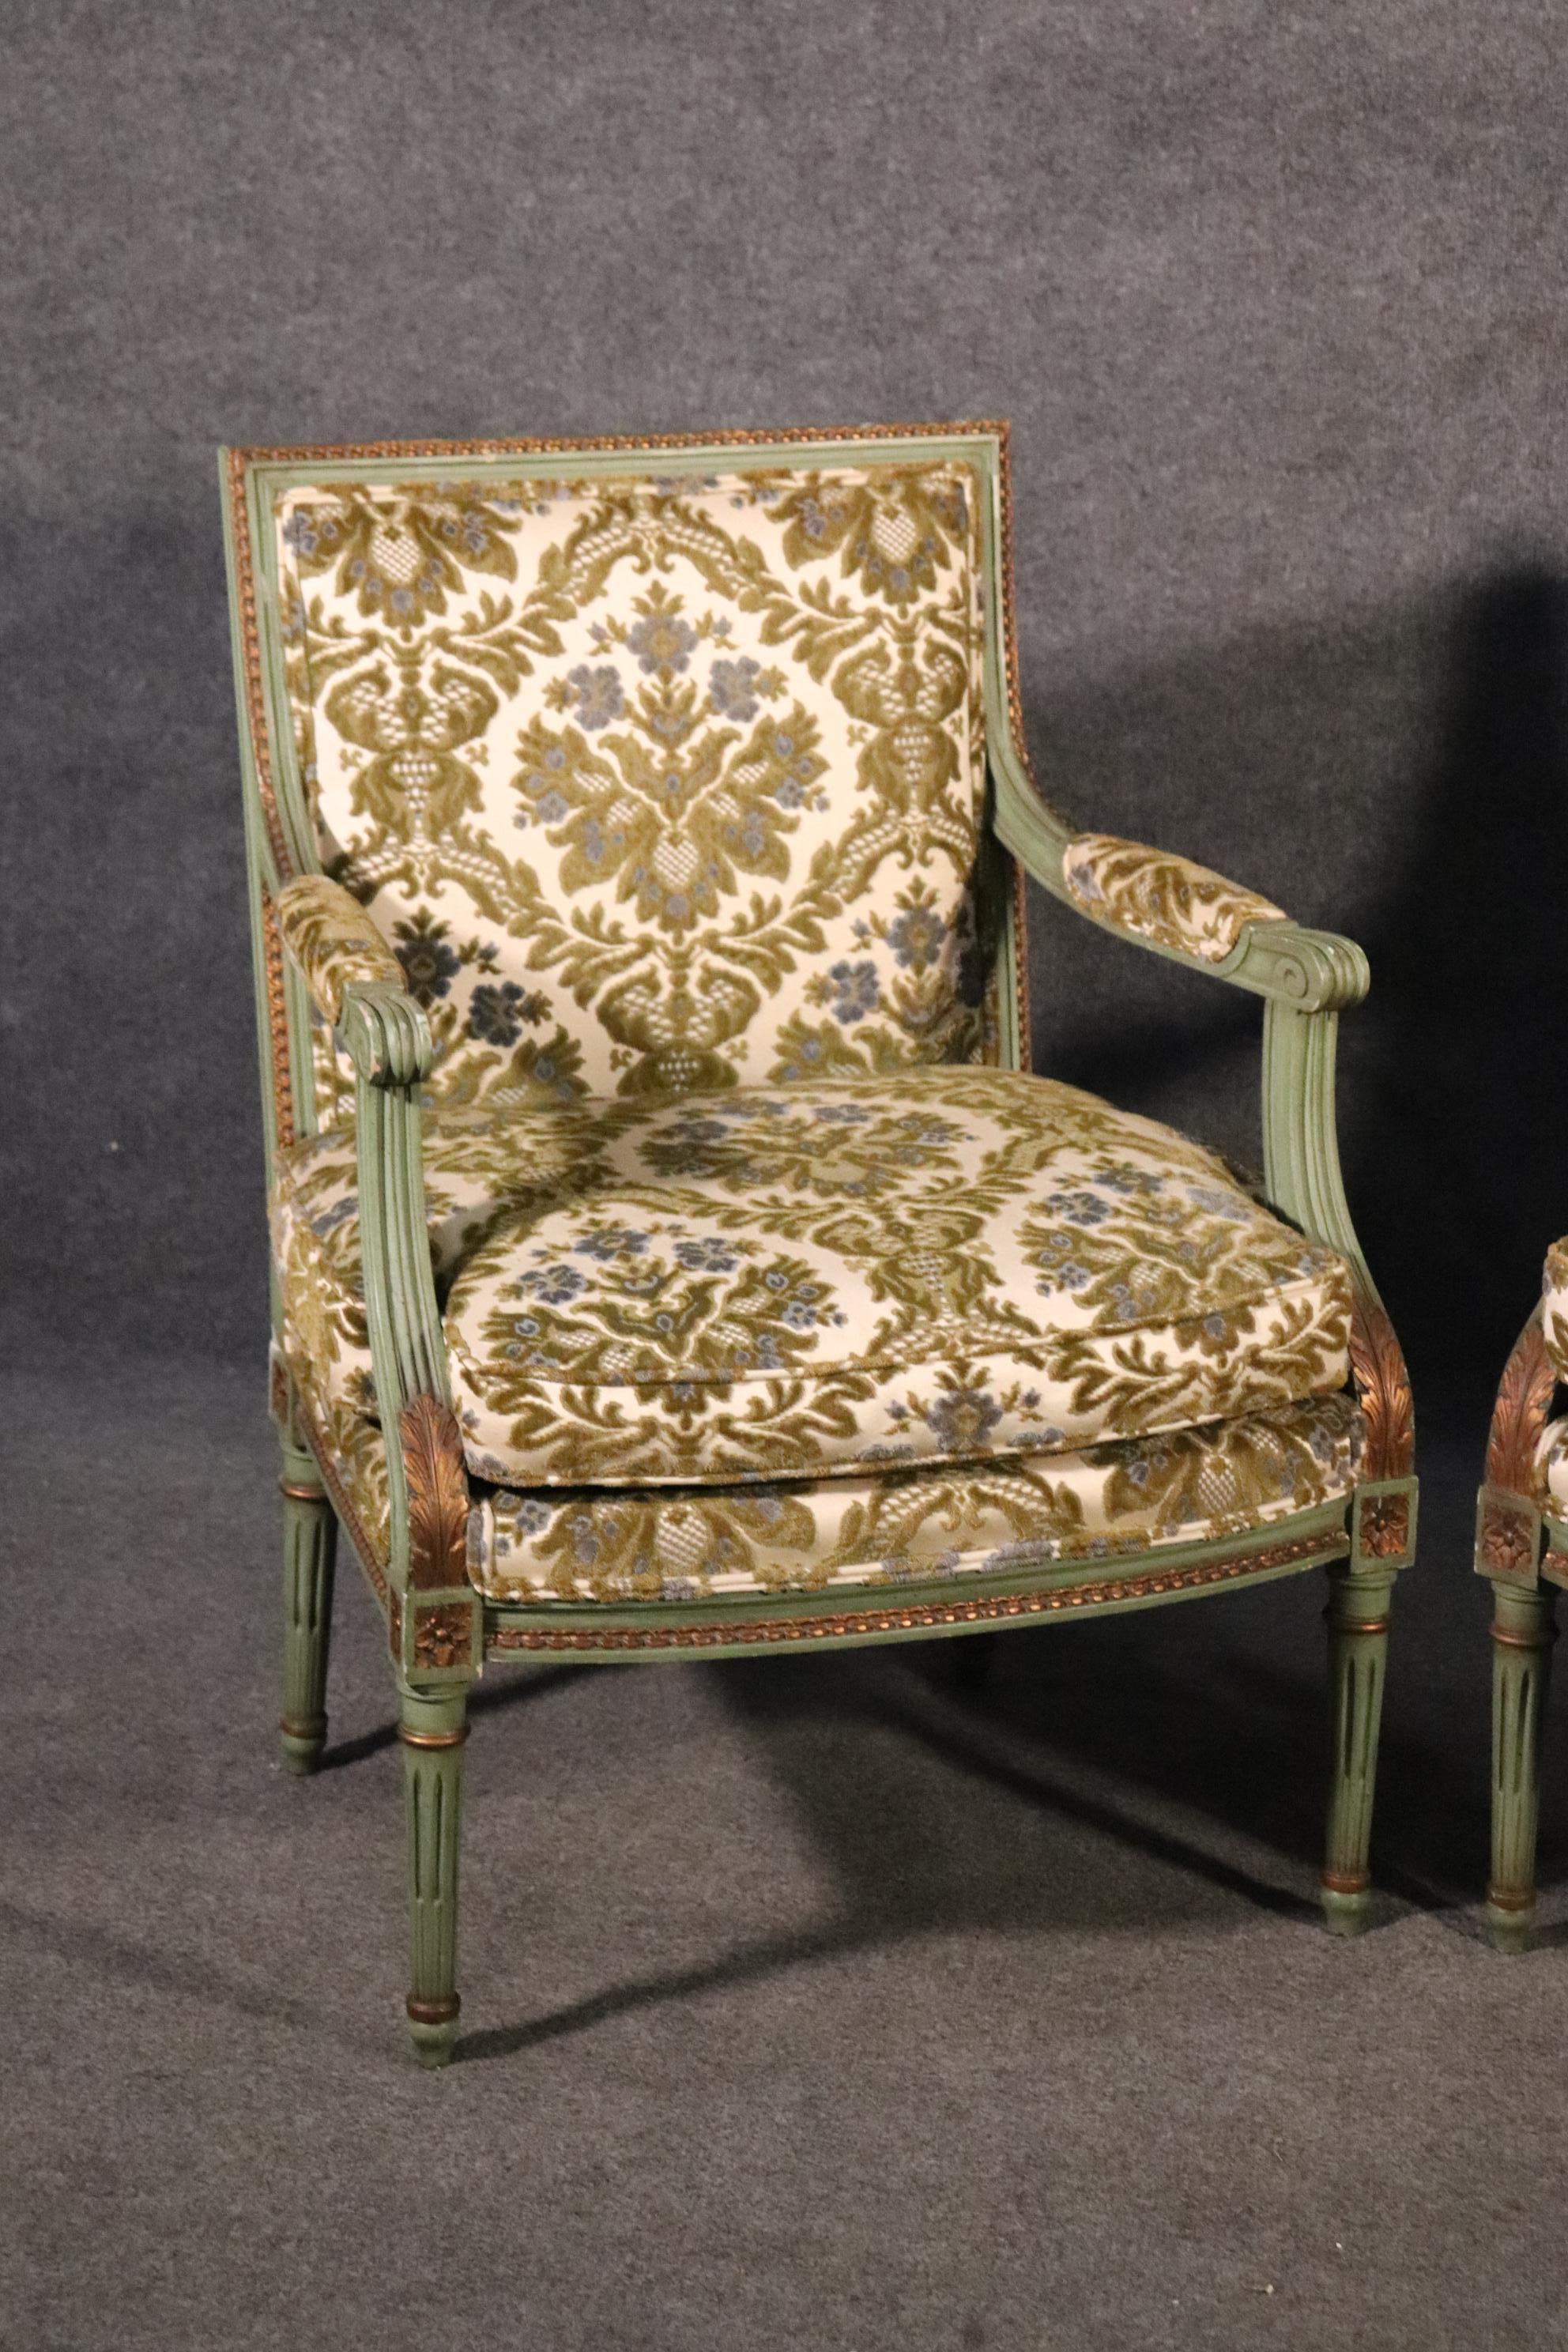 This is a classic square back pair of bergere chairs in their original finish and upholstery. The chairs are in good condition but the cushion foam will need to be redone as they are old and no longer soft. The chairs measure 35 tall x 25 wide x 24